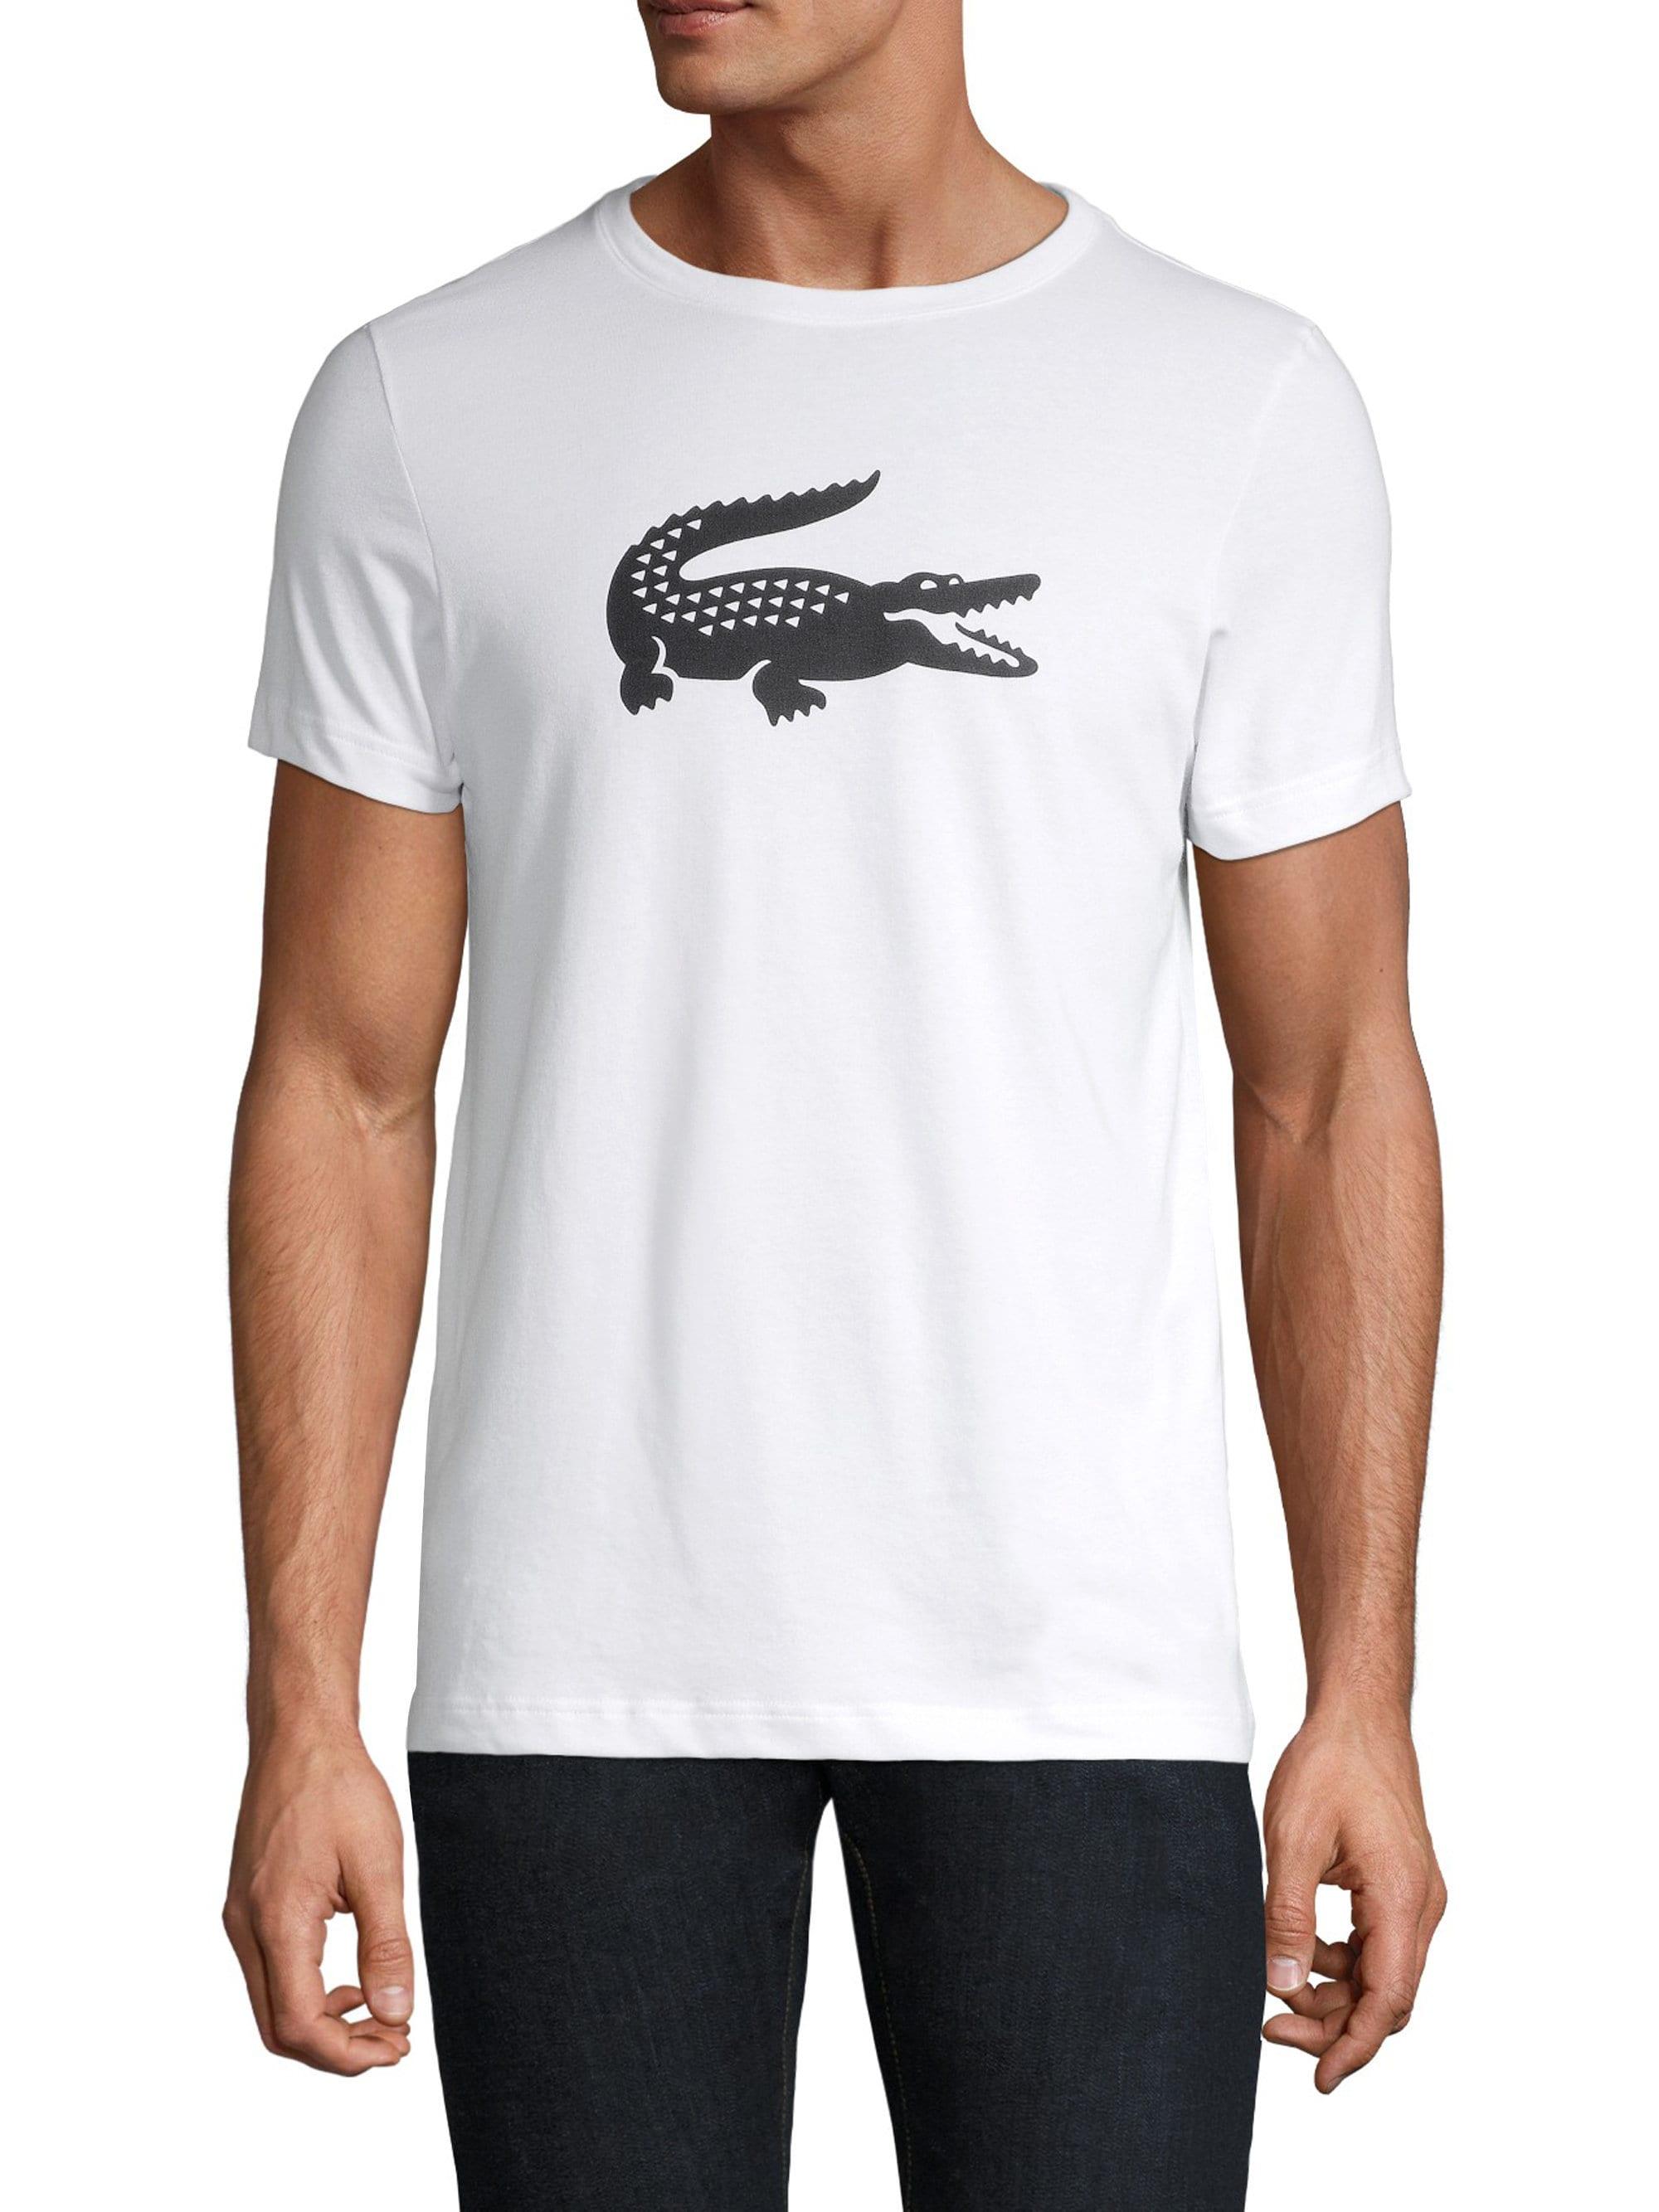 Lyst - Lacoste Big Croc Sport Tee in White for Men